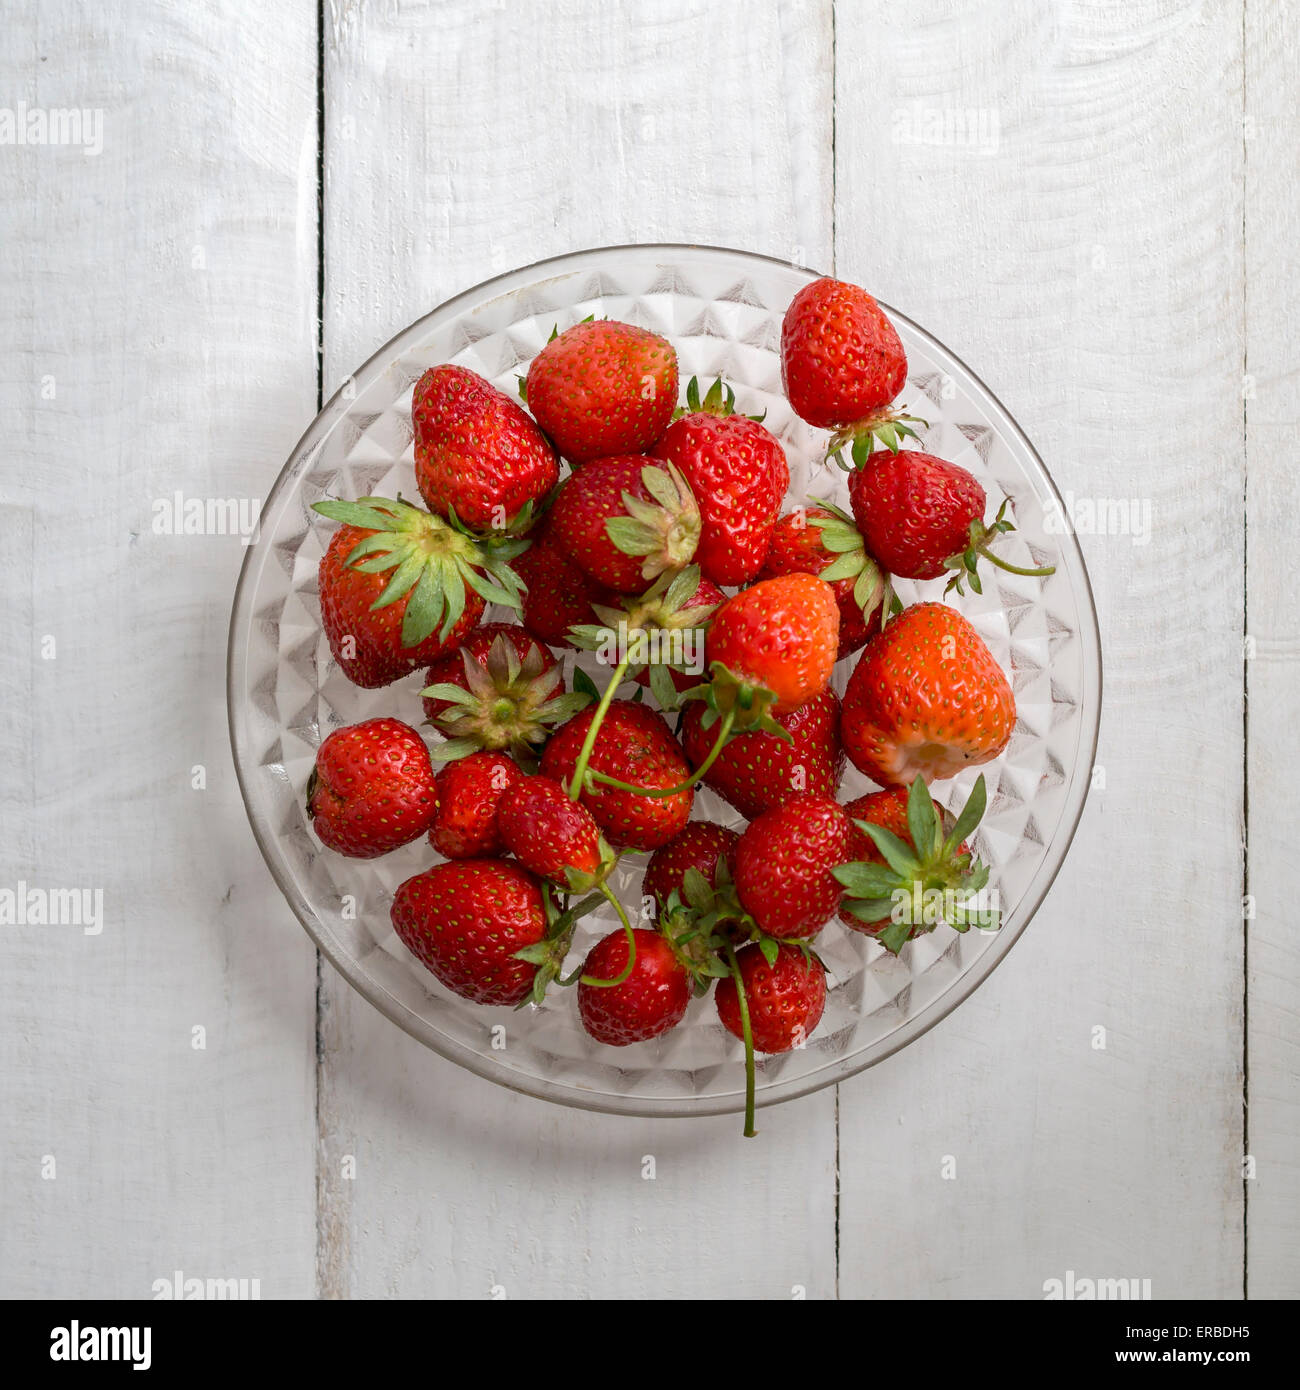 Organic ripe juicy strawberries on wooden table, from above Stock Photo